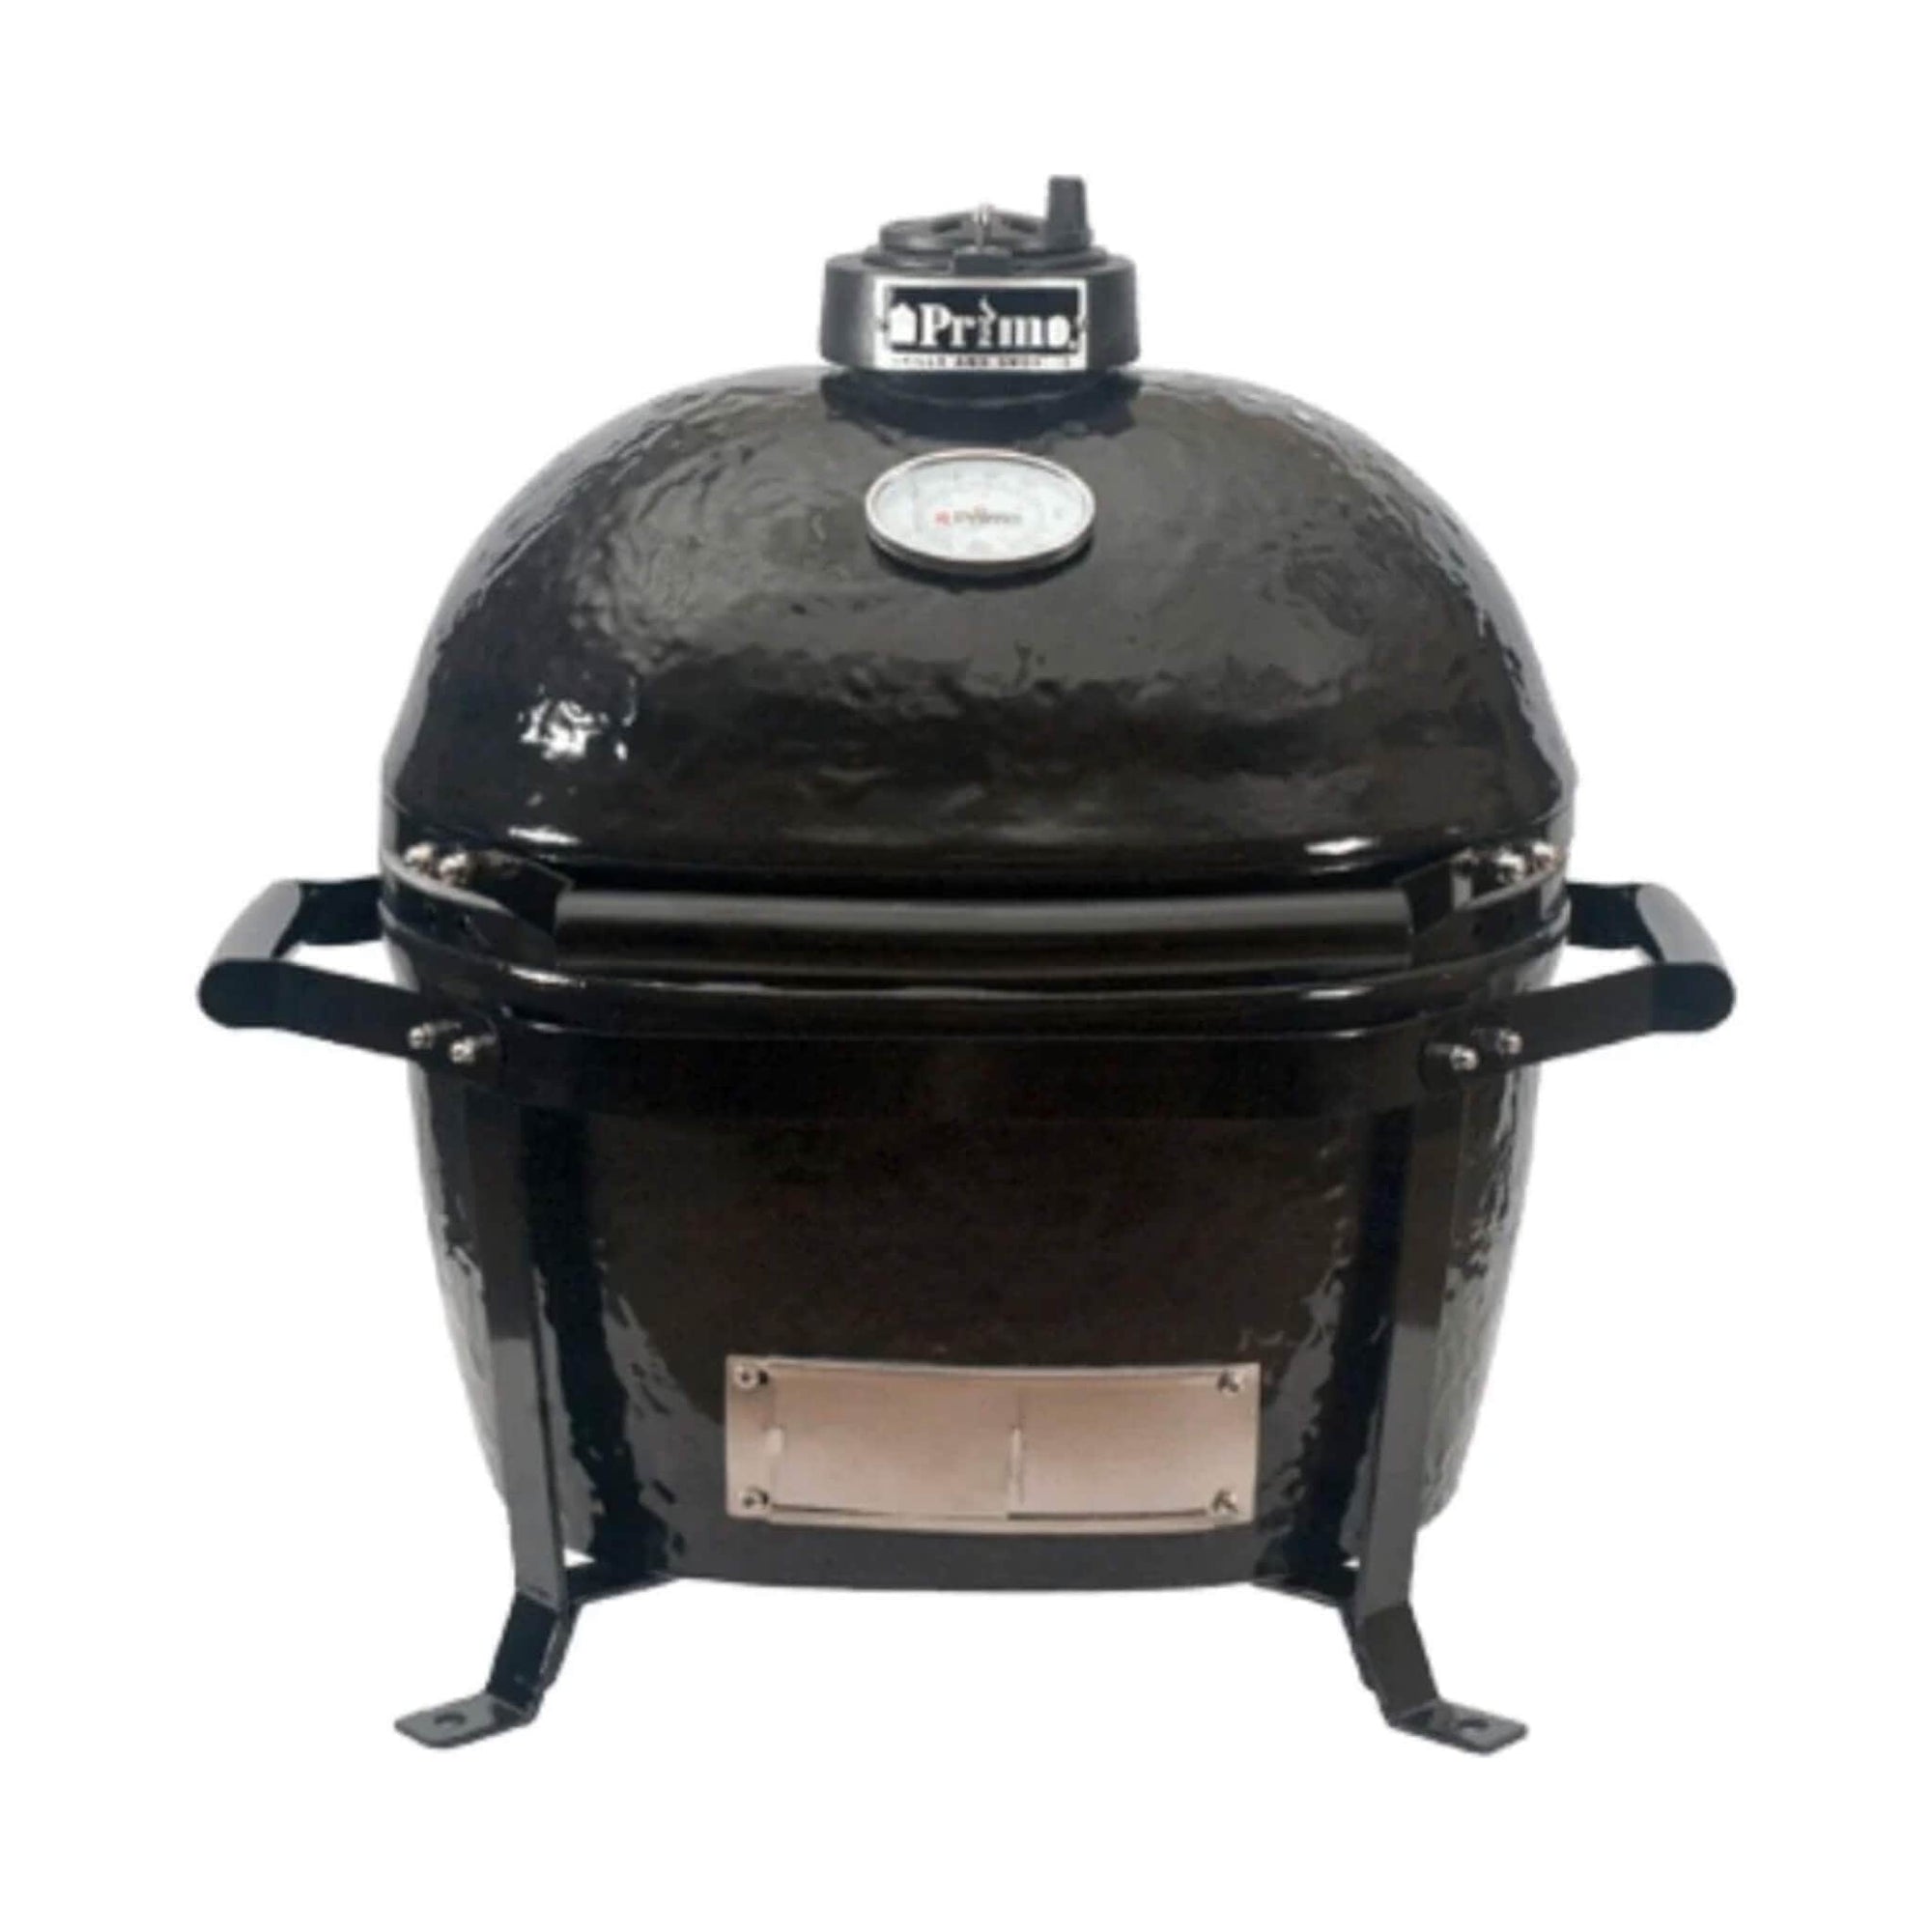 Primo Junior 200 Oval Ceramic Kamado Grill with Stainless Steel Grates - Culinary Hardware